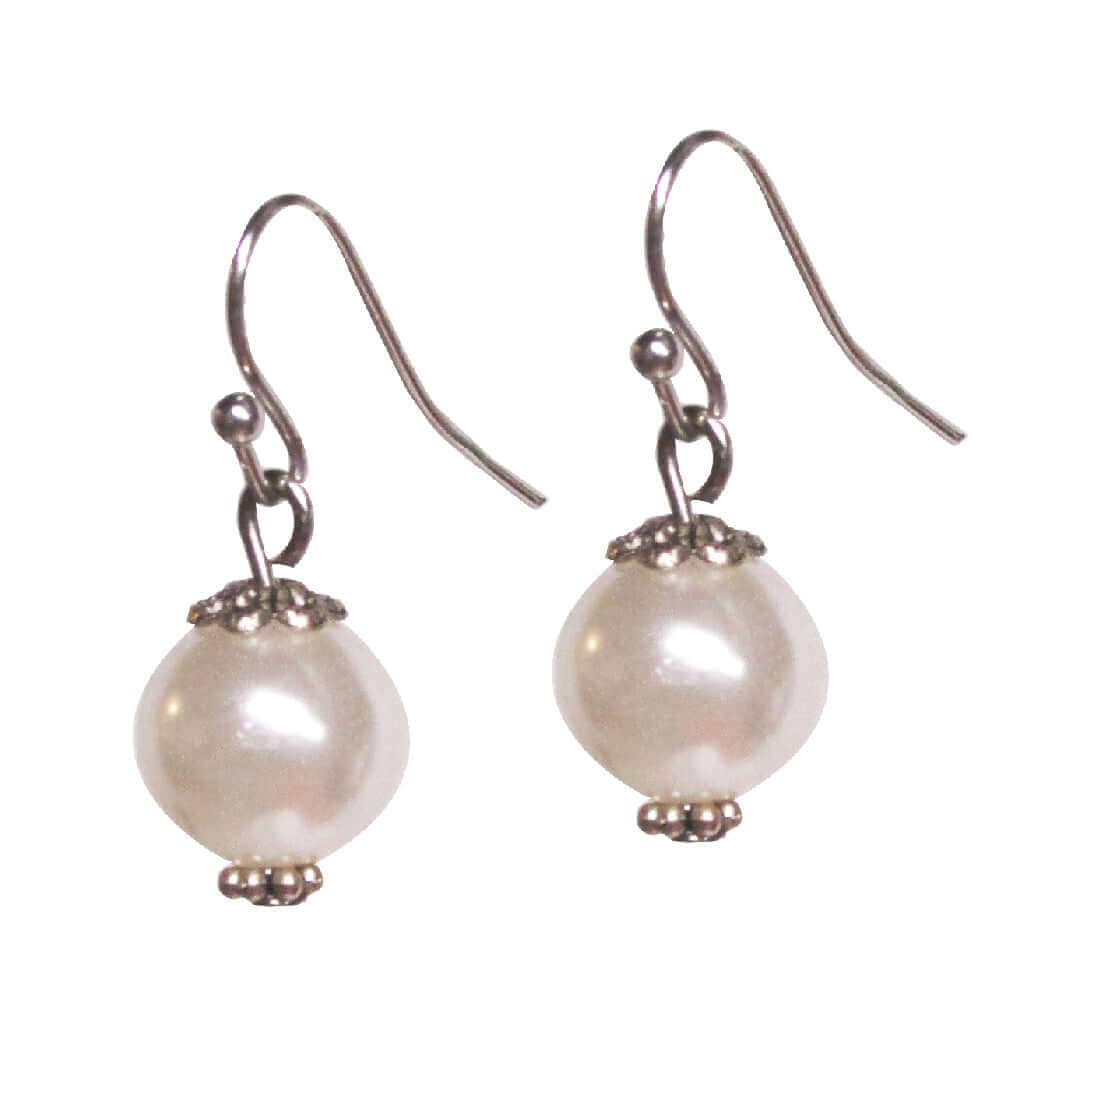 Ivory Simulated Pearl Fish Hooks Earrings Fashion Jewelry Earrings A Moment Of Now Women’s Boutique Clothing Online Lifestyle Store